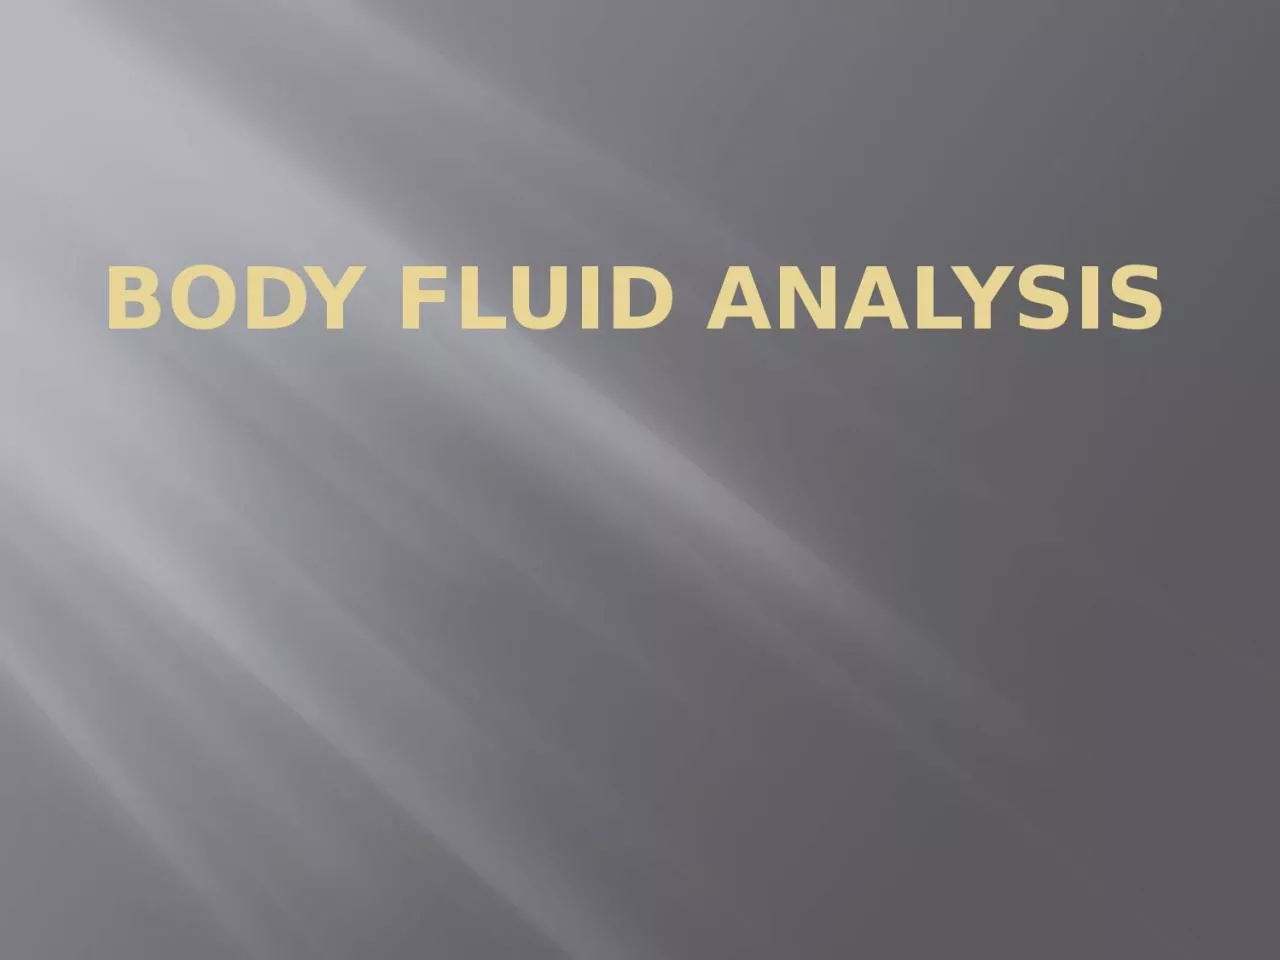 Body fluid analysis            Chapter One